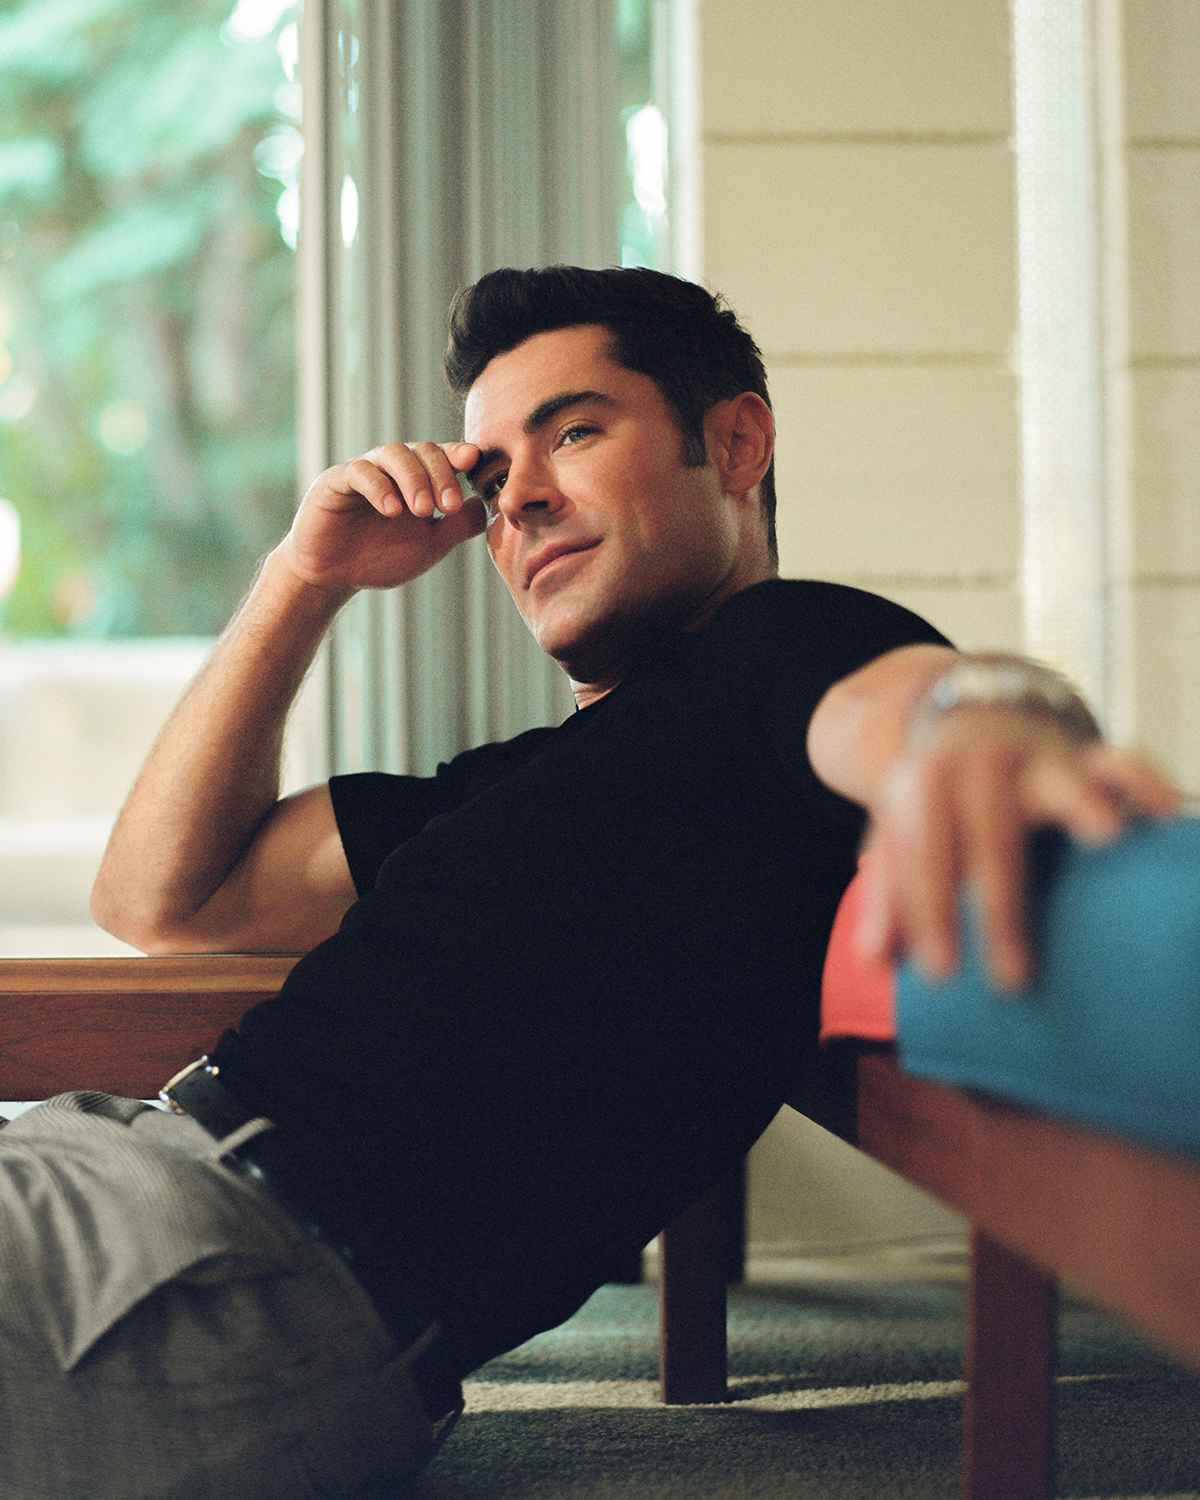 Zac Efron Variety Cover Story